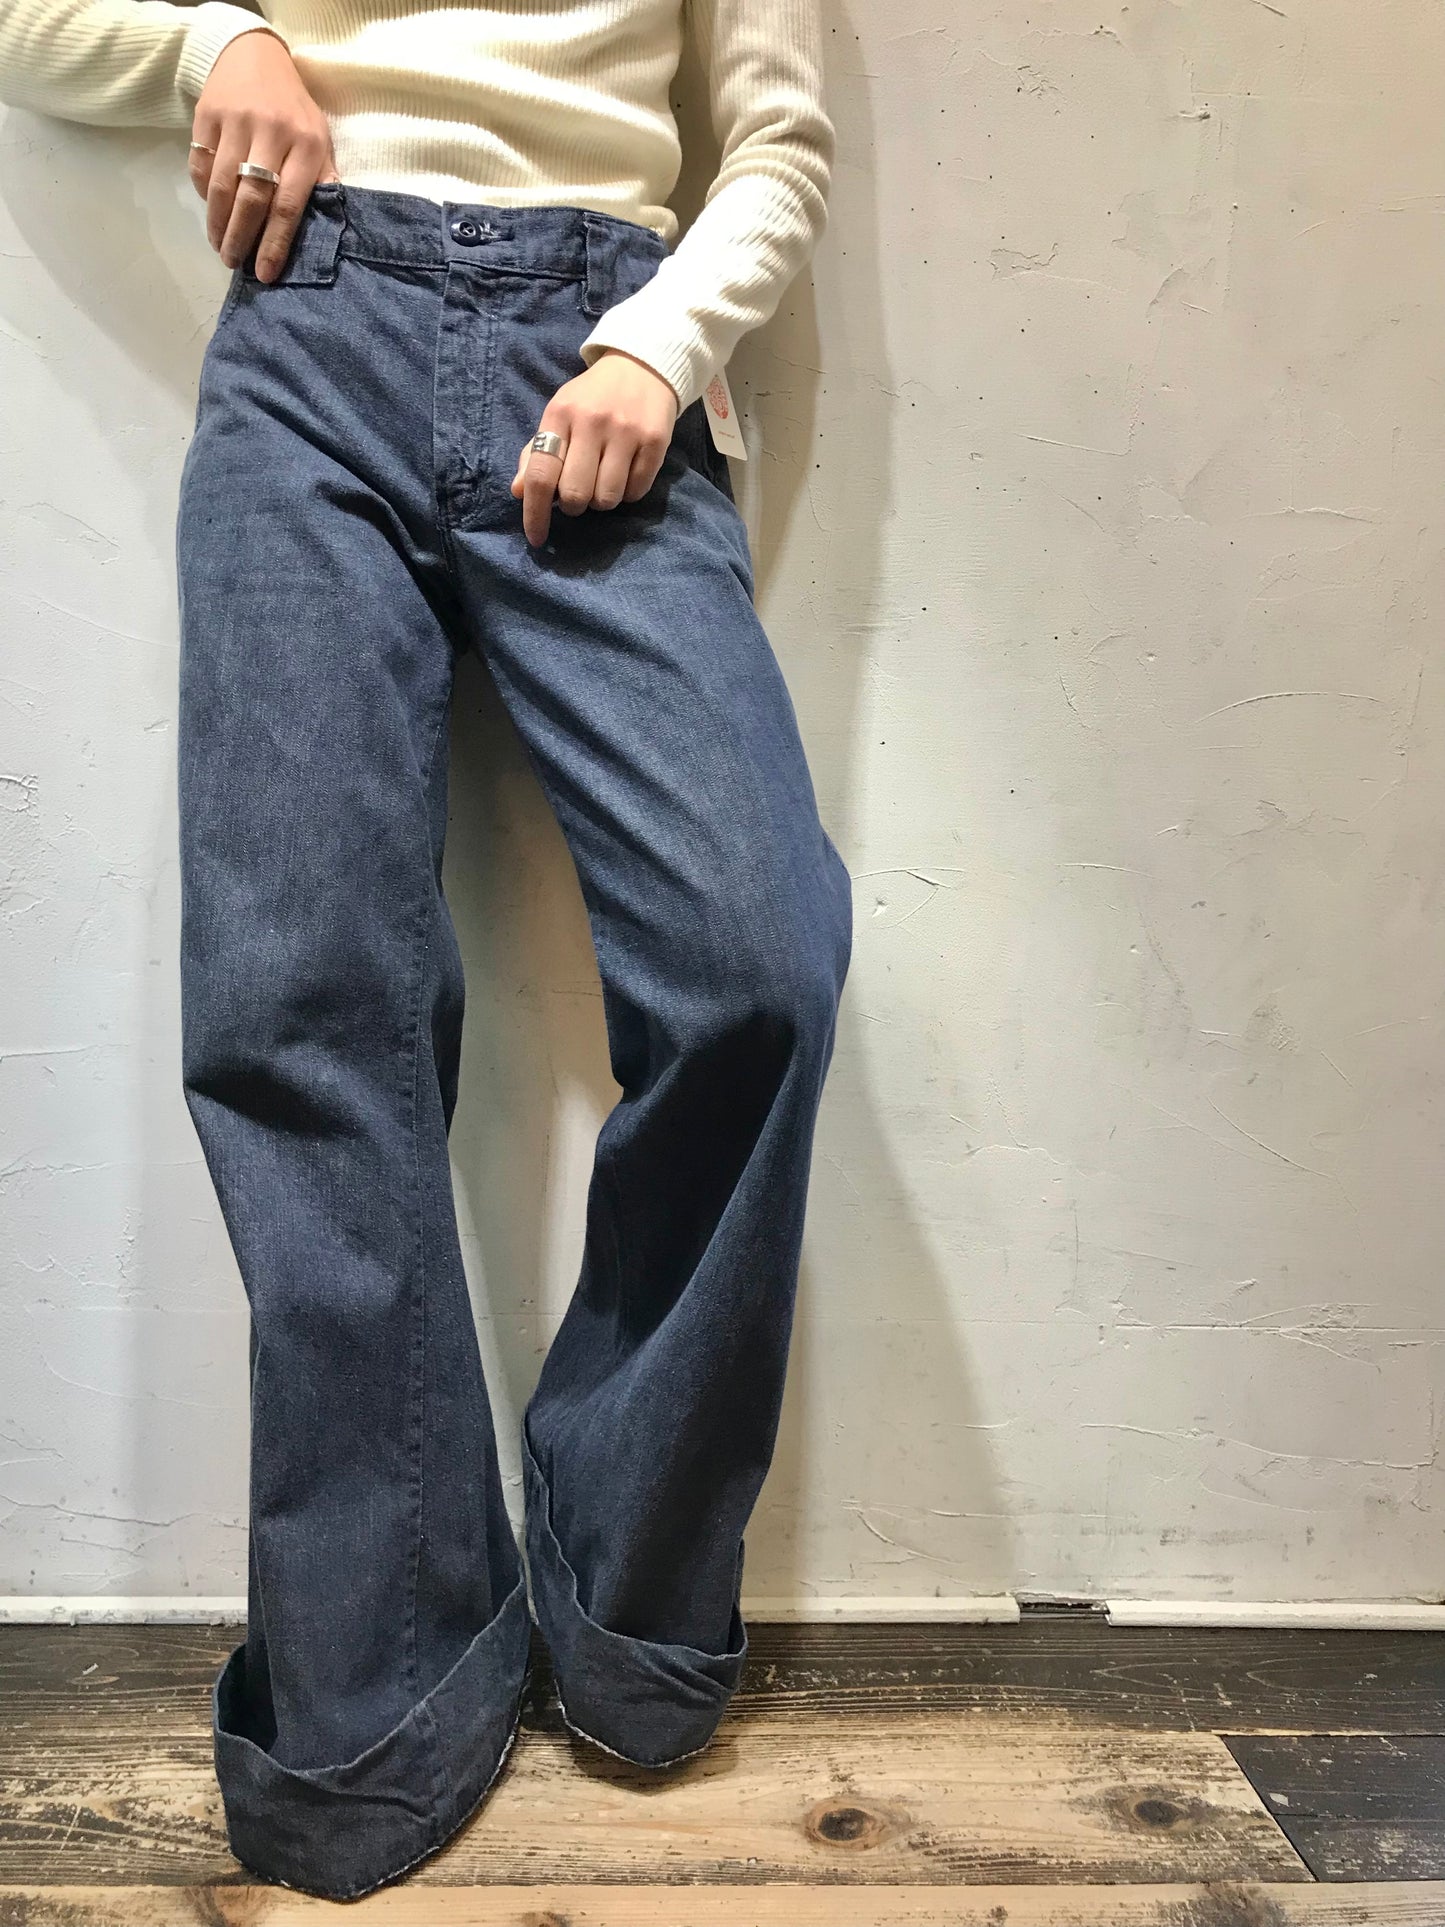 ’70s Vintage Denim Pants  MADE IN USA [A25940]